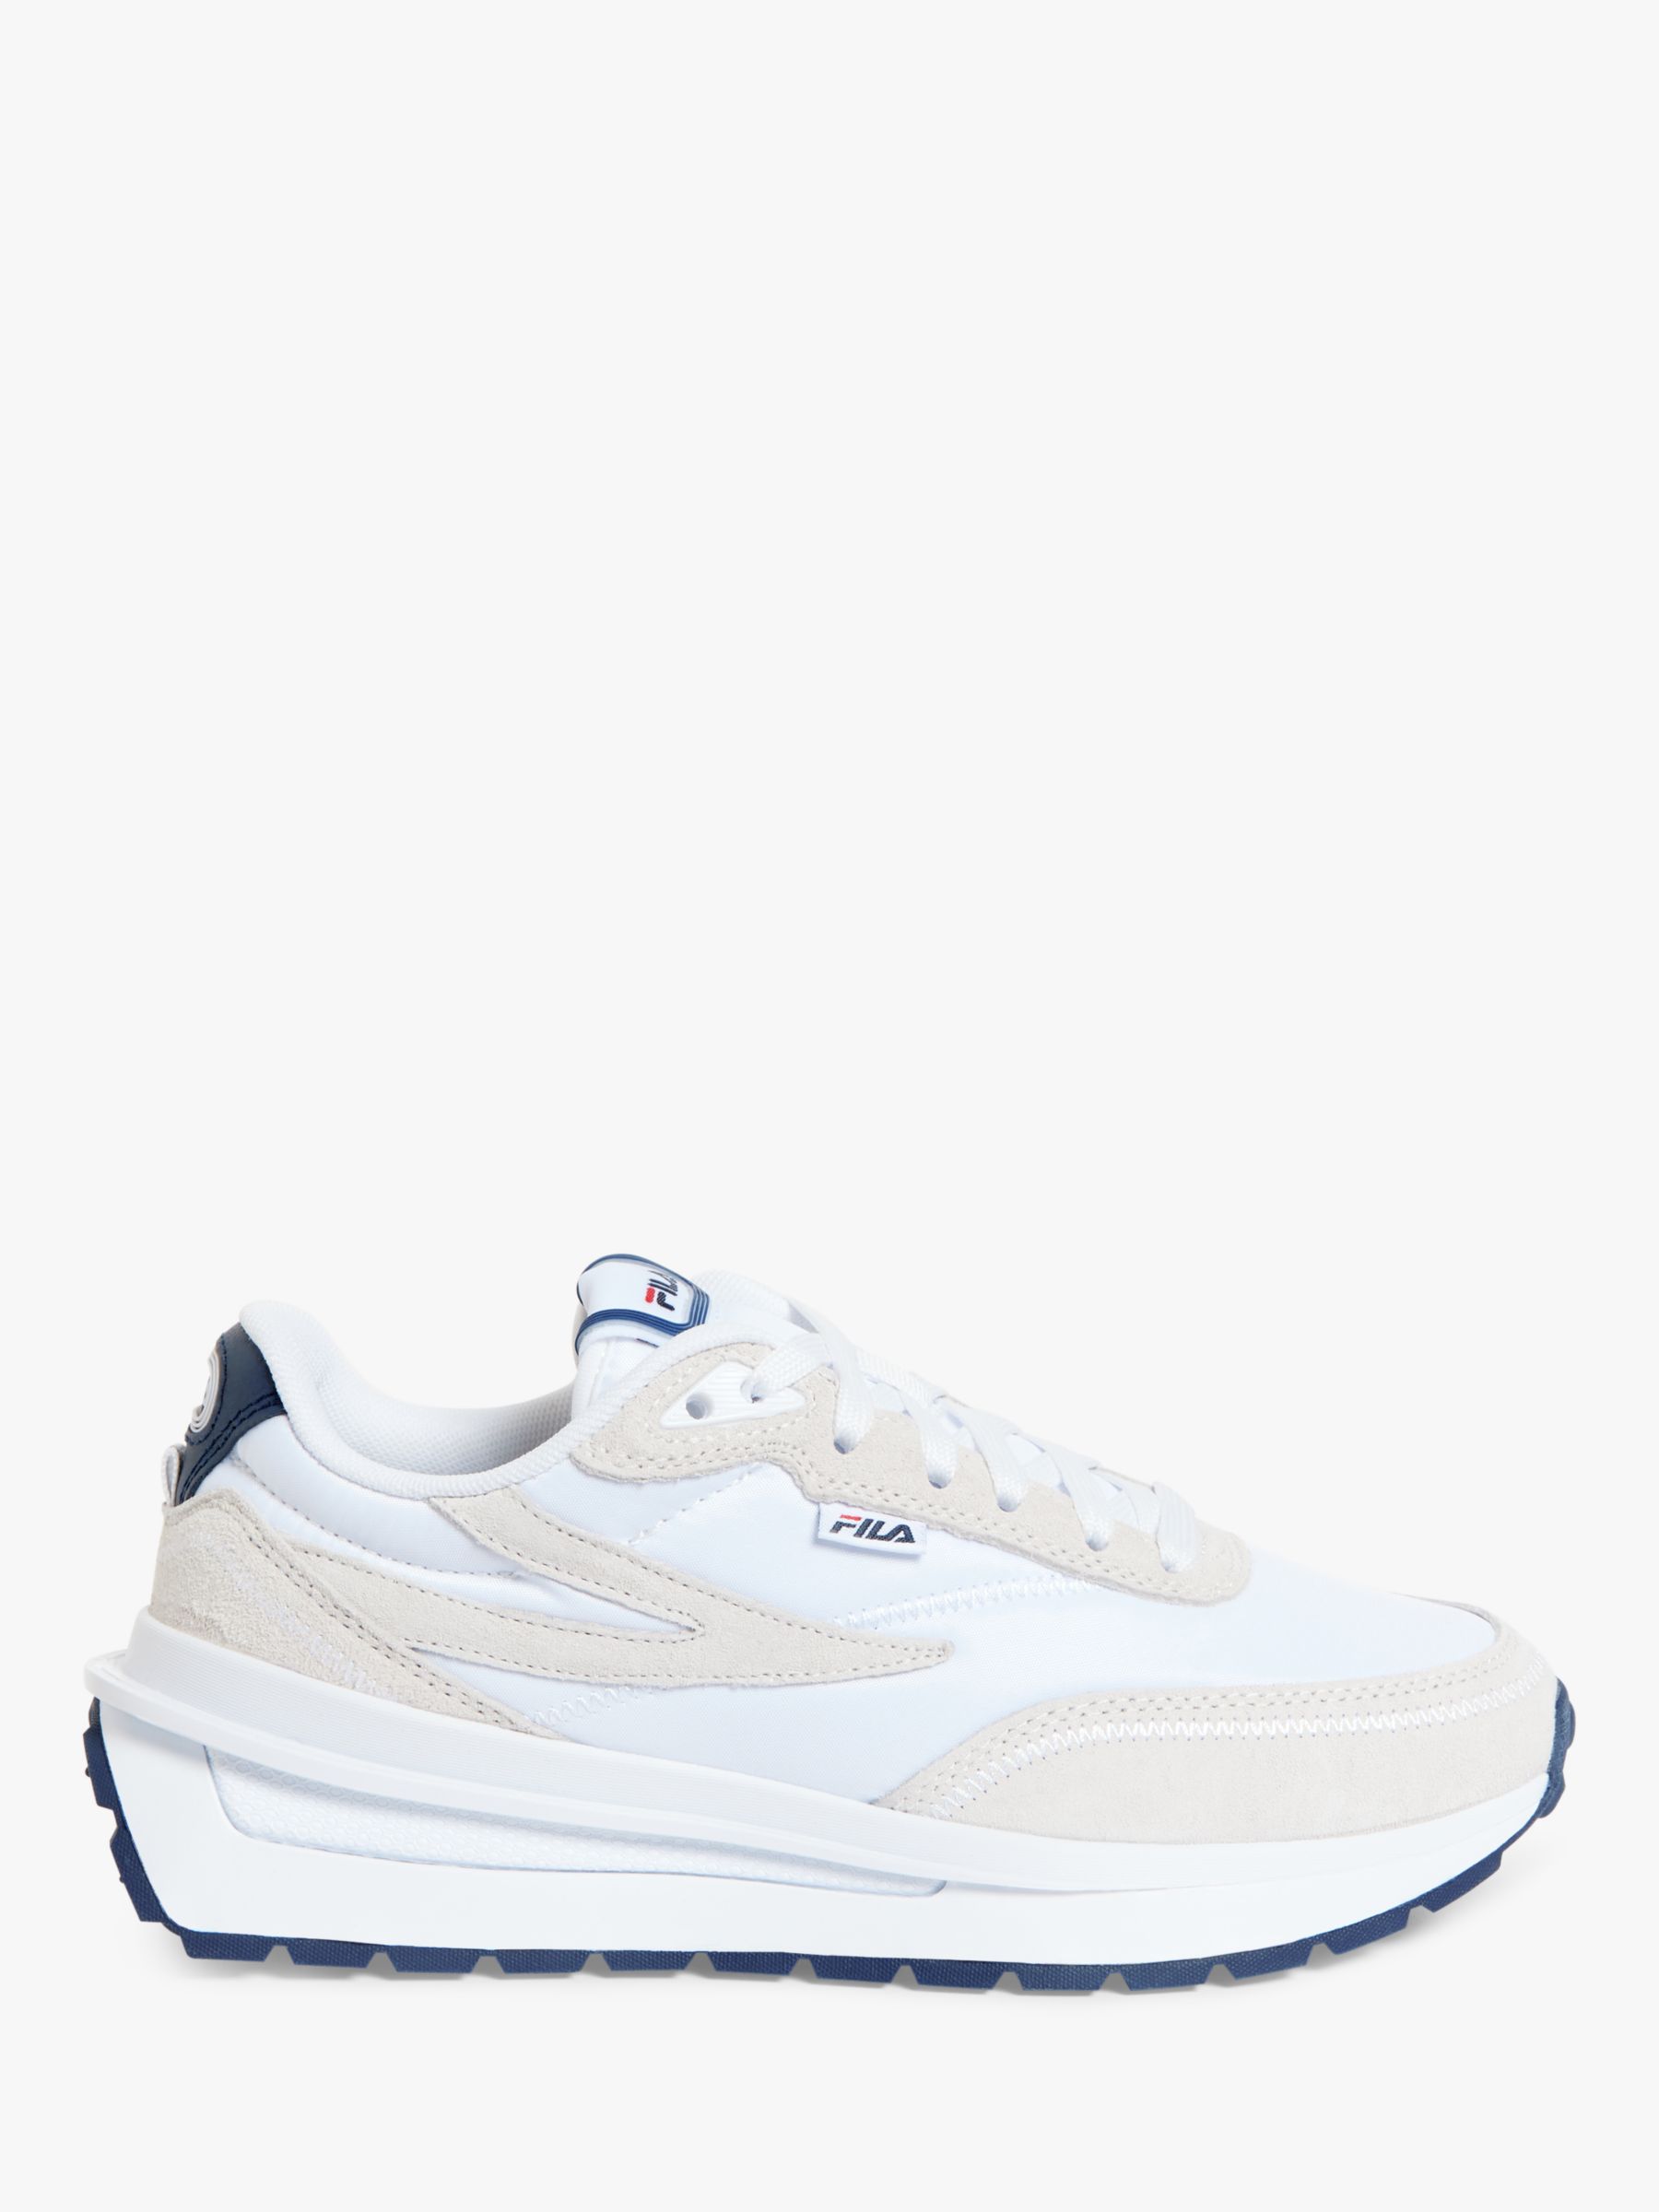 Fila Renno Suede Trainers, White at John Lewis & Partners